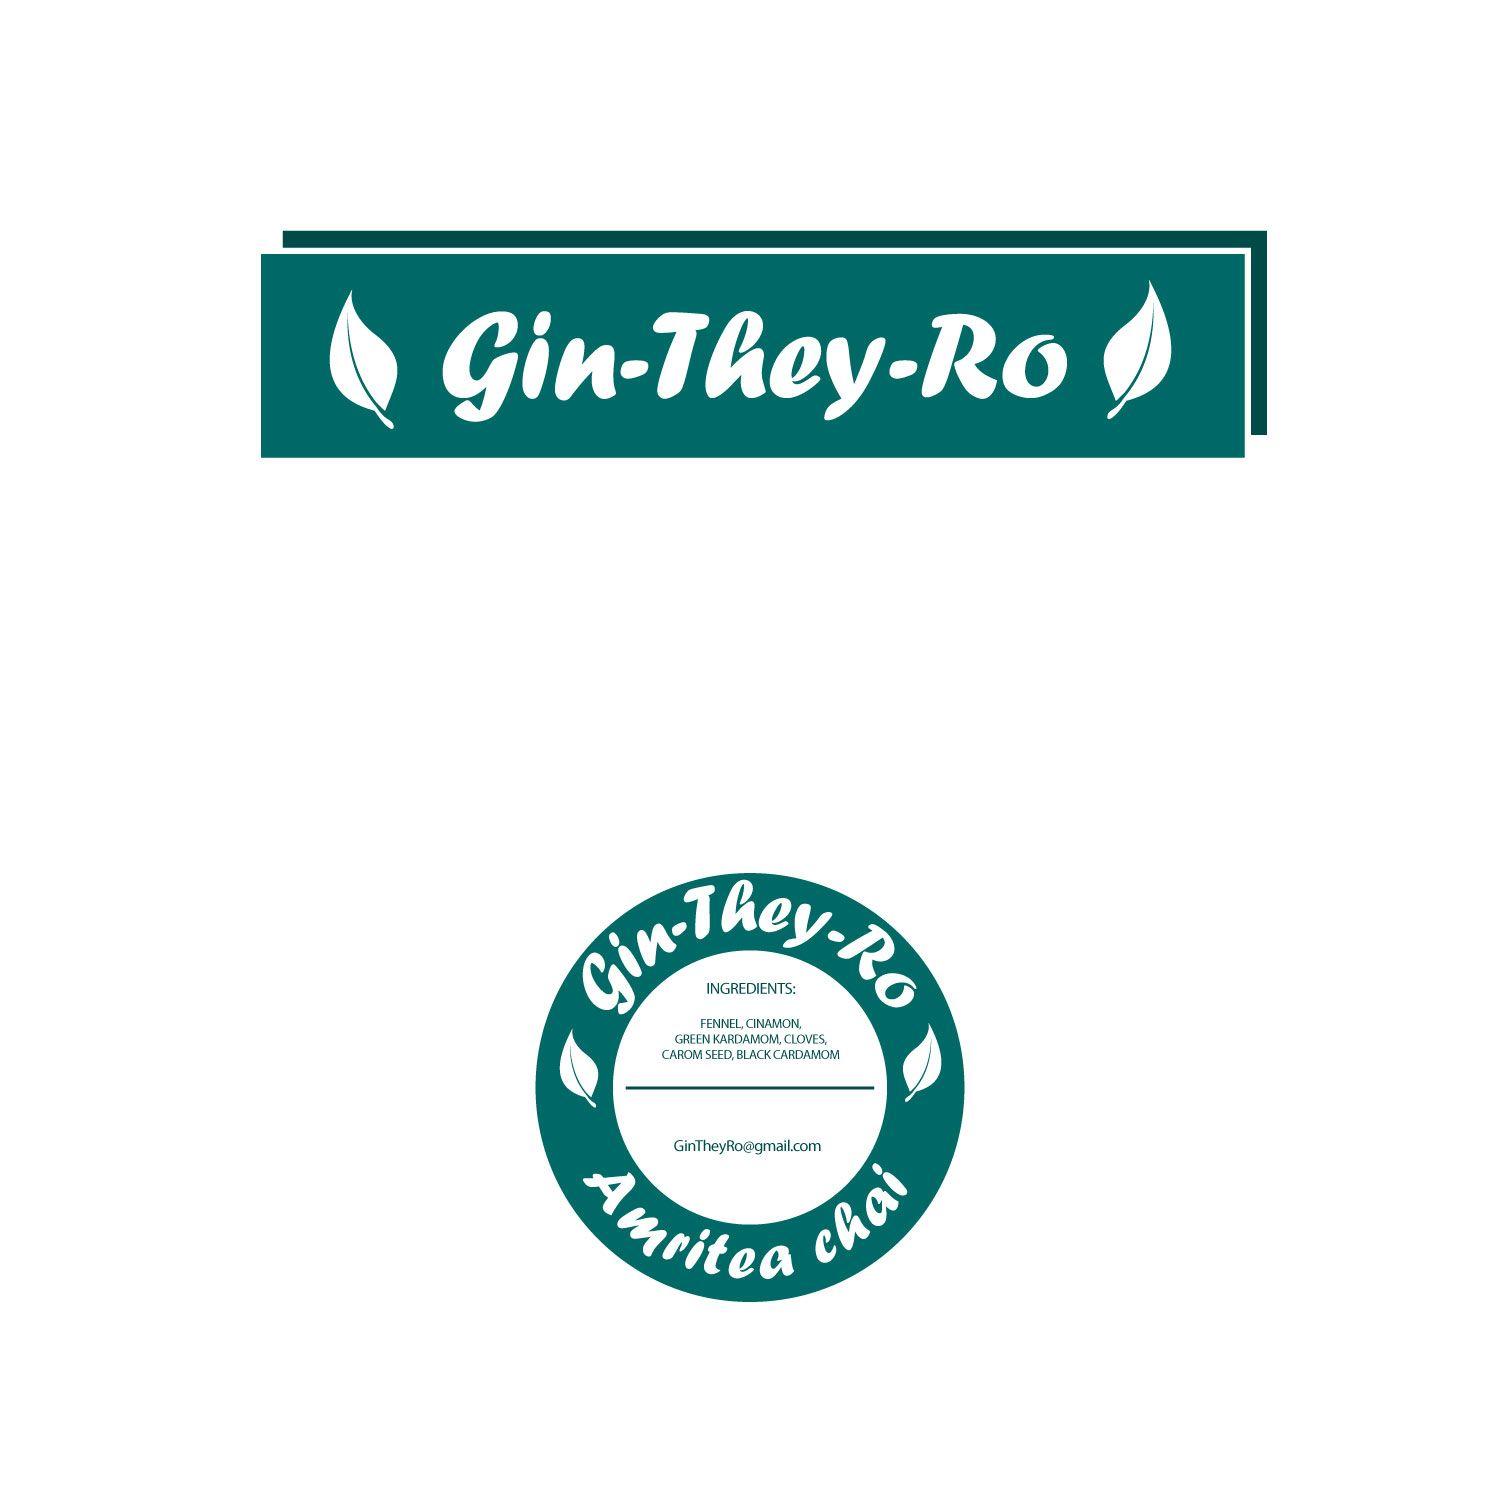 Ro Logo - It Company Logo Design for Gin-They-Ro by sinthetix | Design #12608856